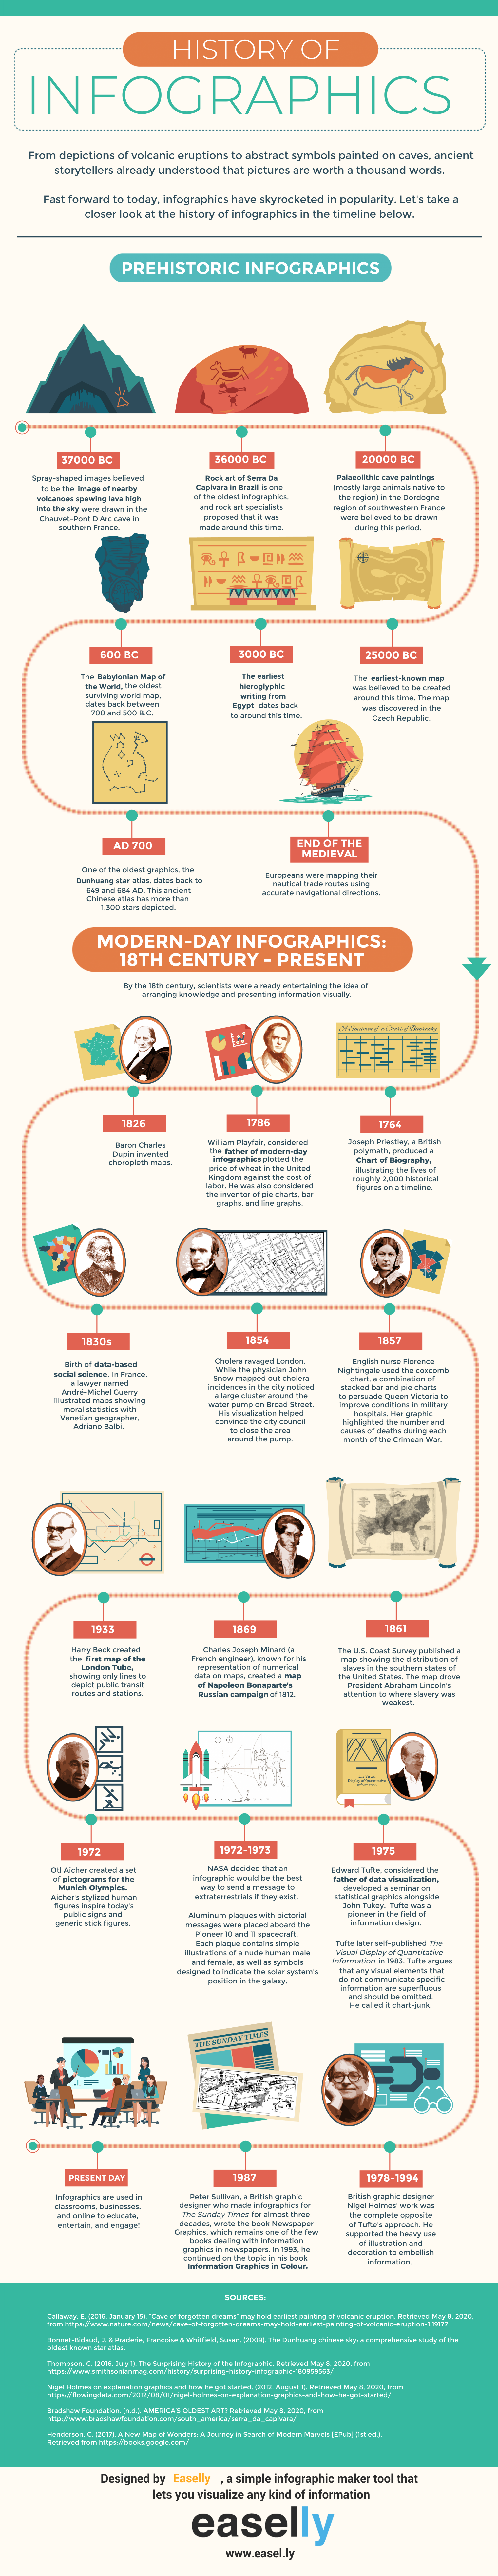 infographic examples infographic